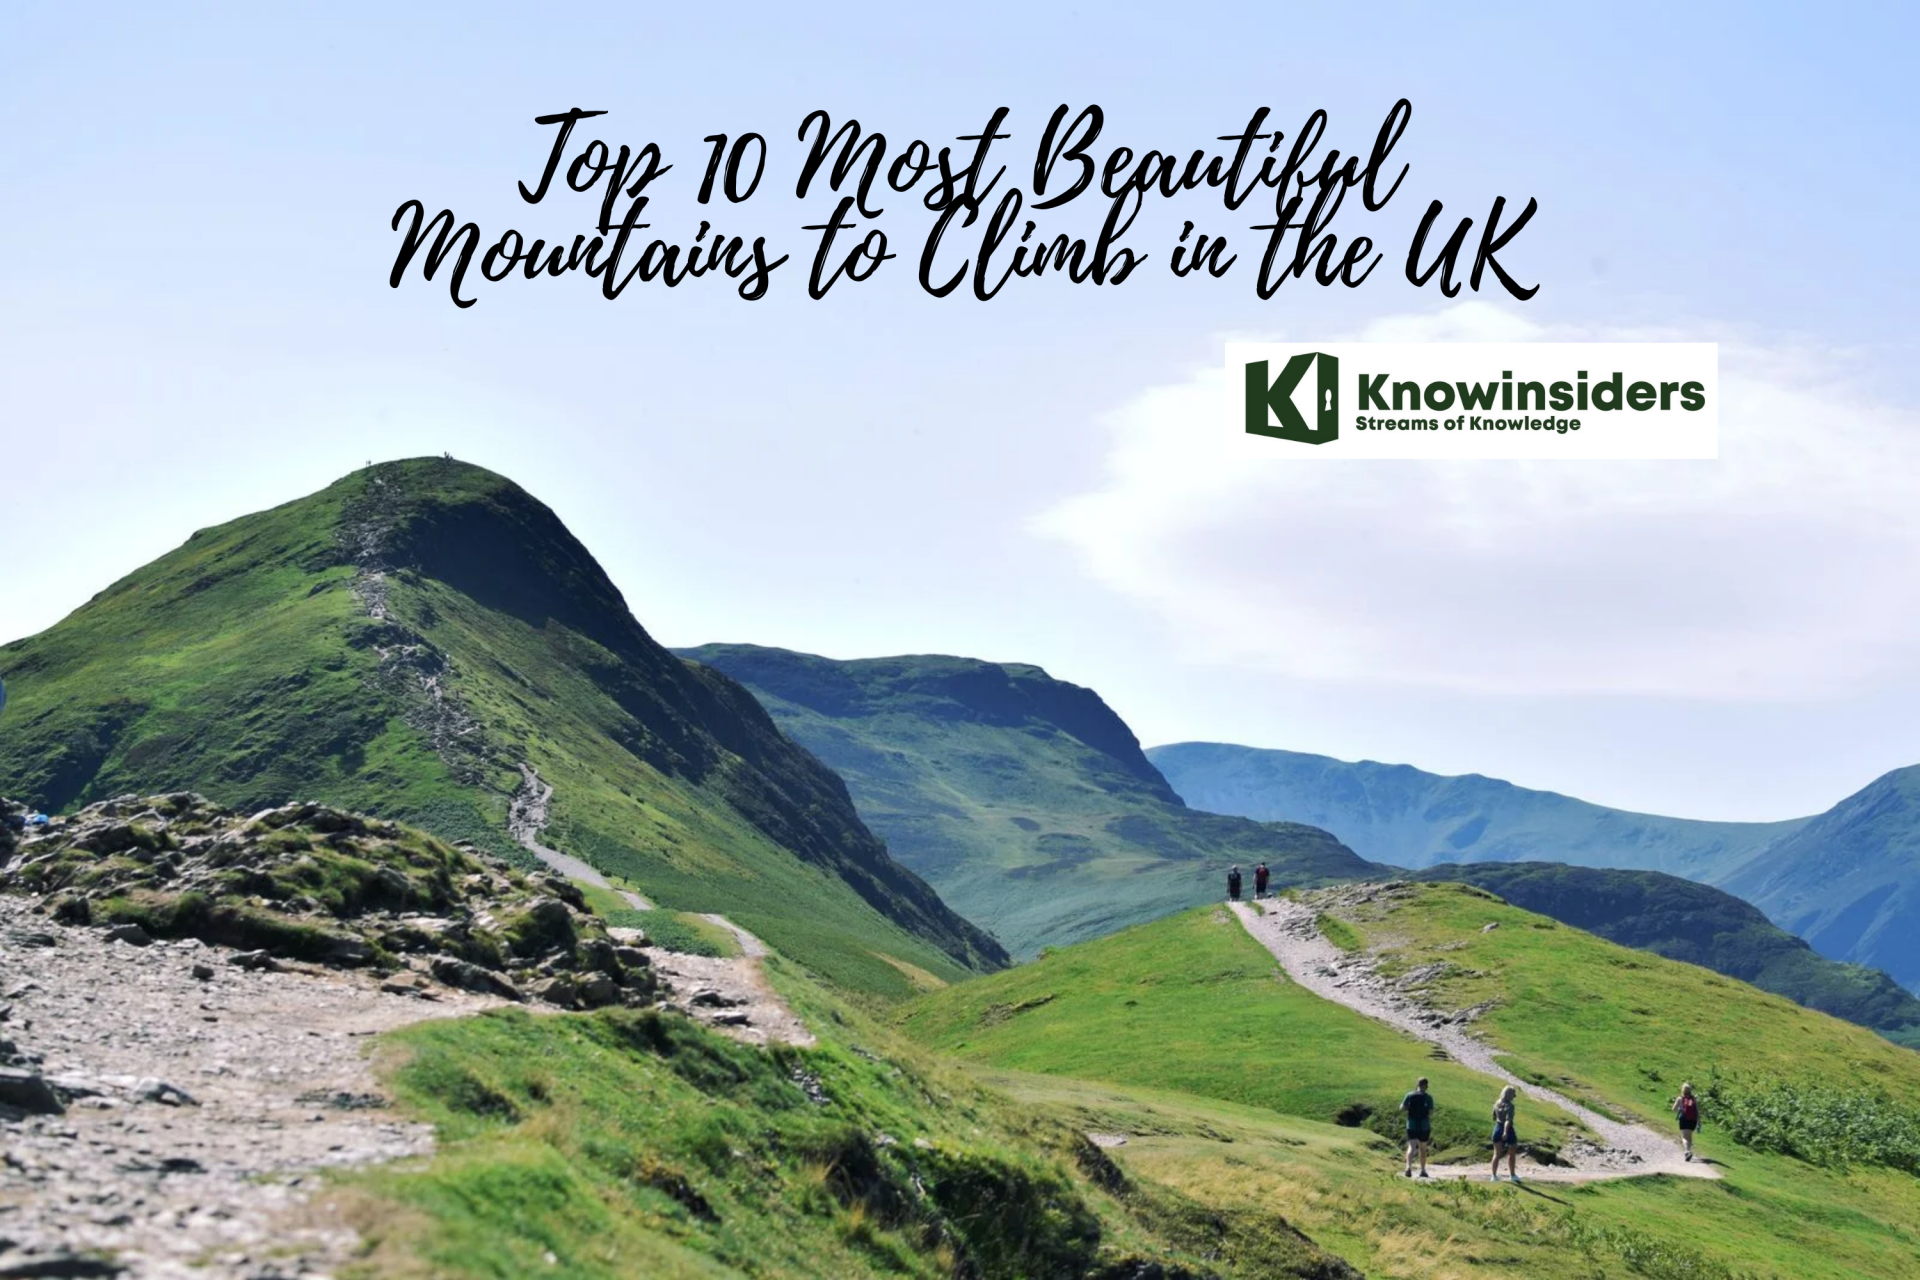 Top 10 Most Beautiful Mountains to Climb in the UK